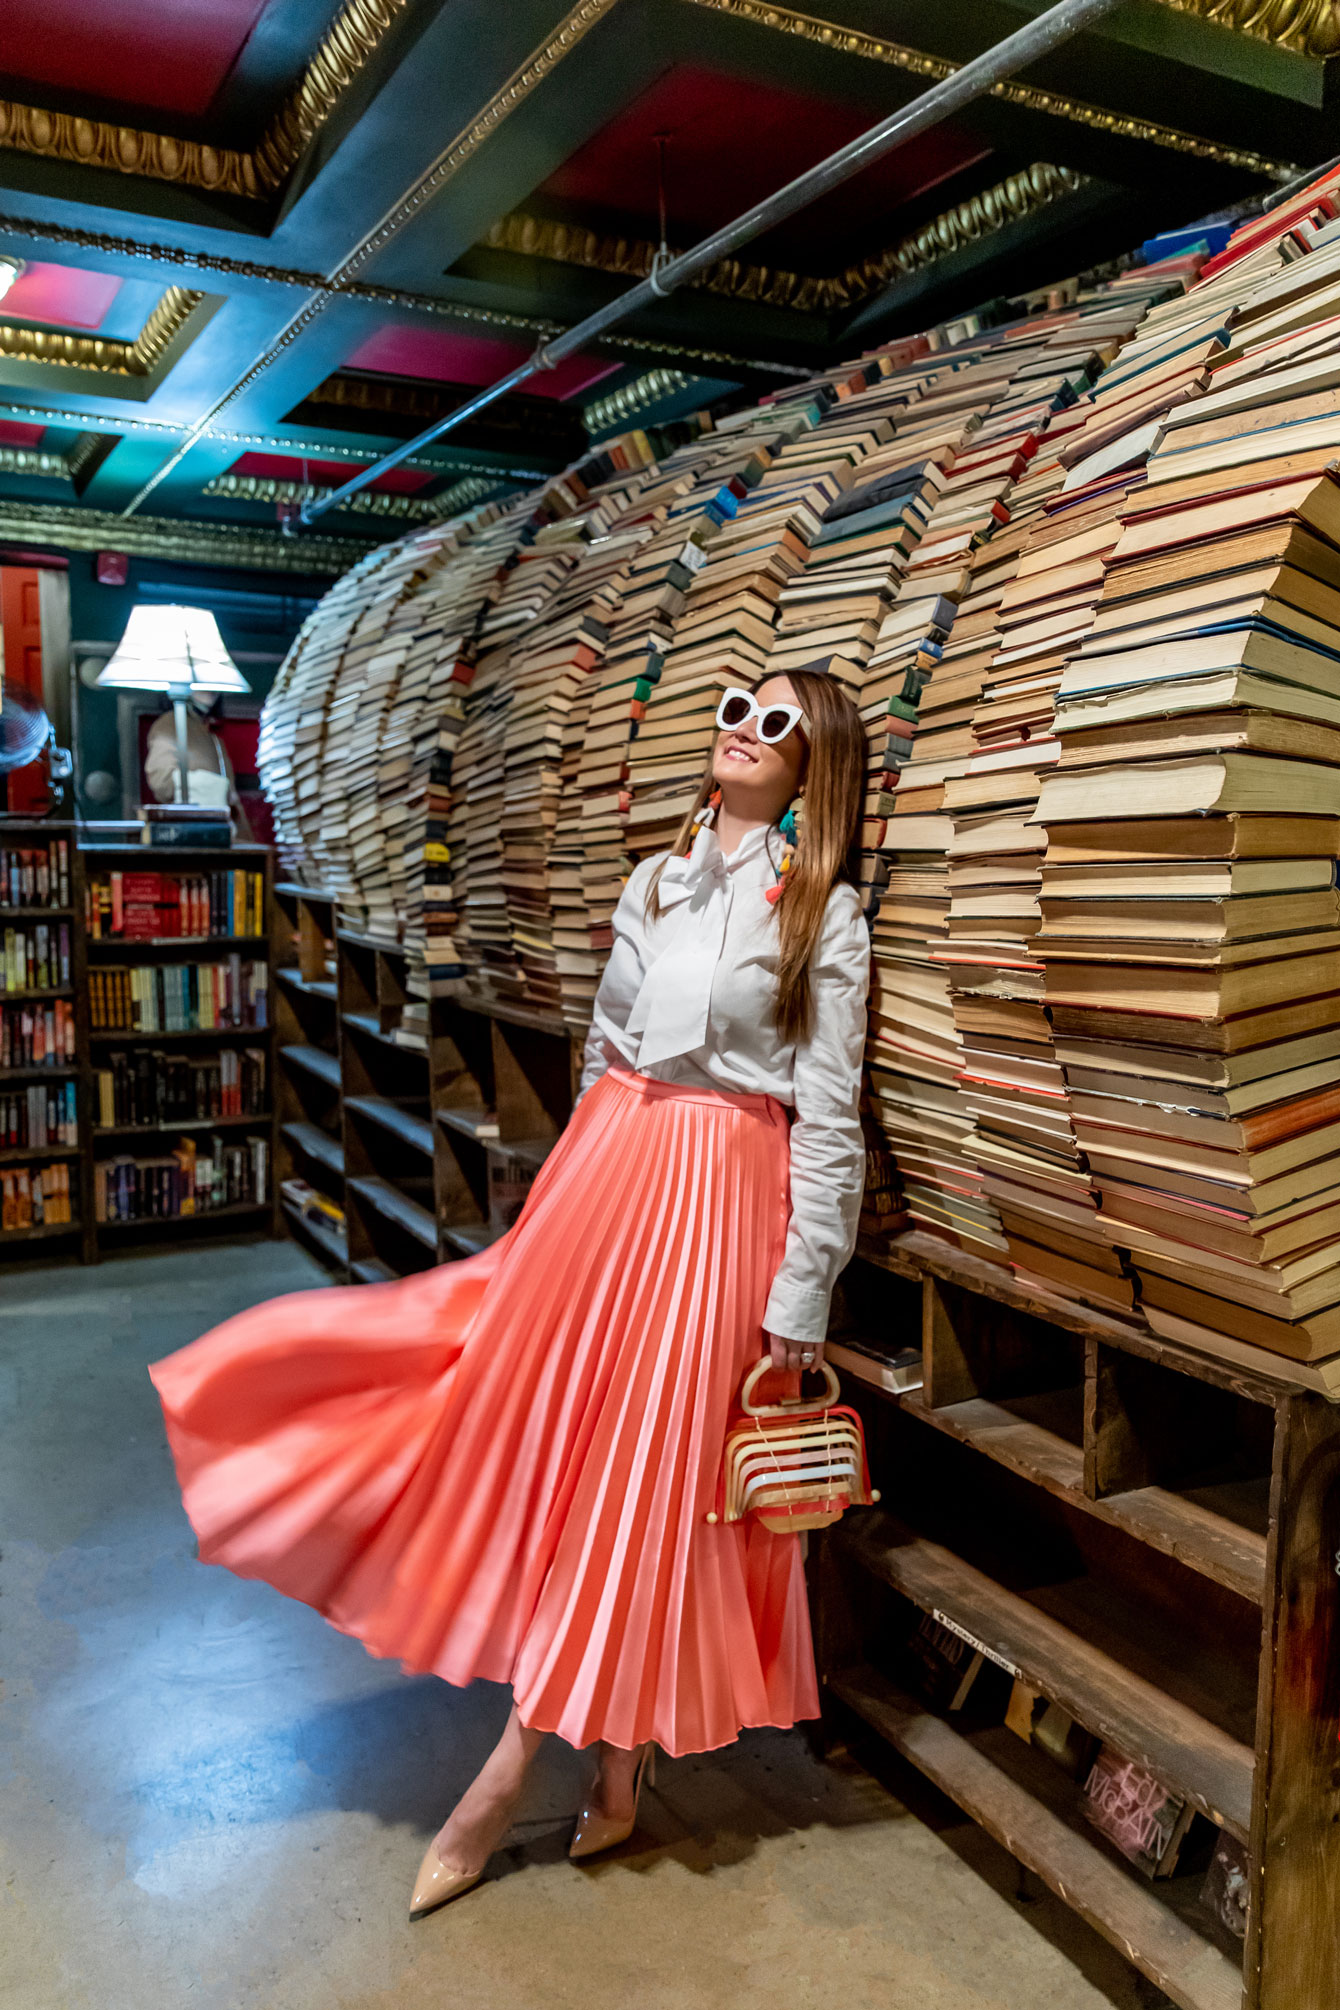 Instagrammable Bookstore